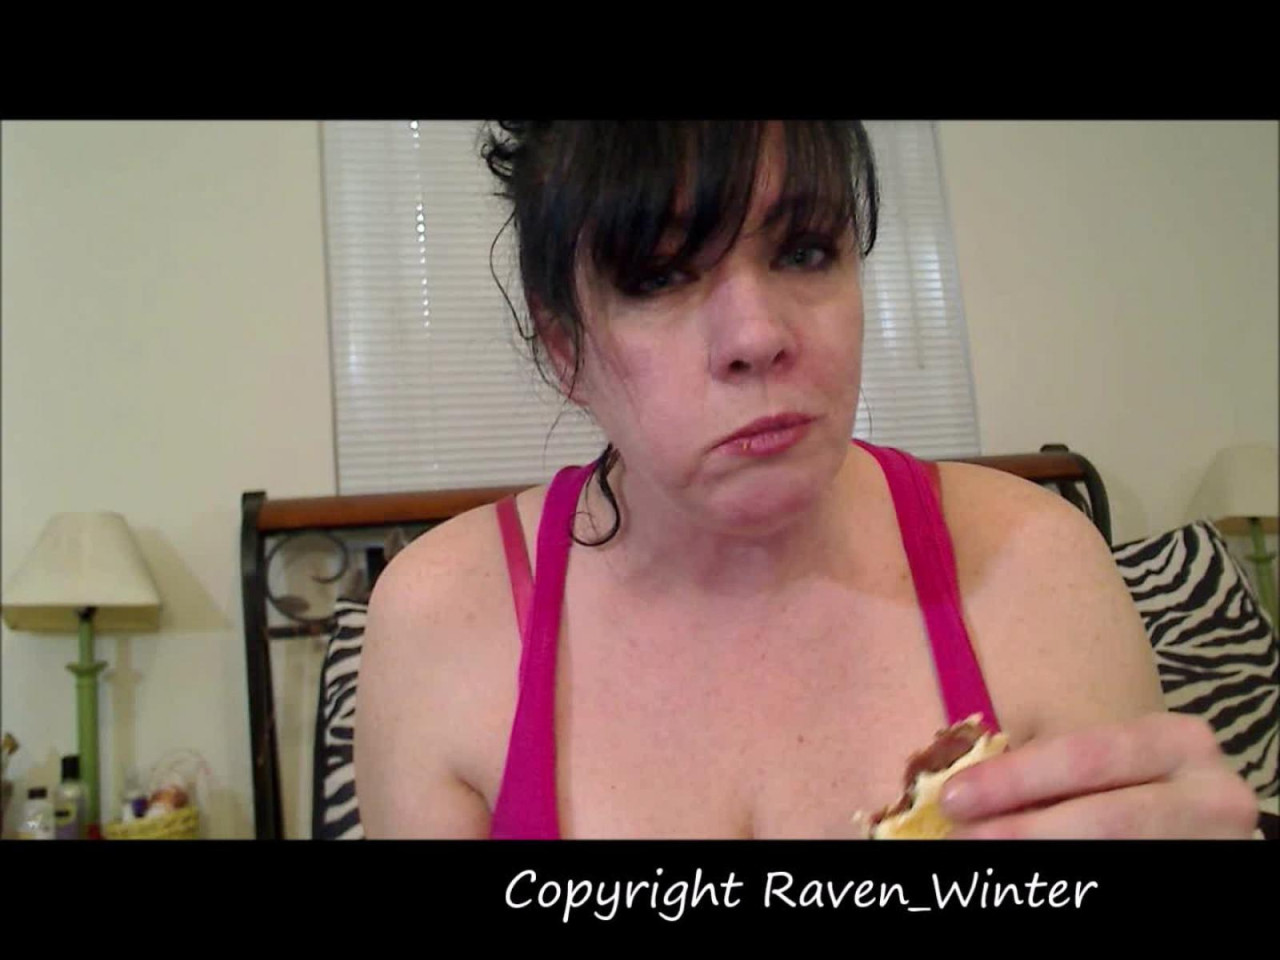 raven_winter show nude release [2021/12/19]